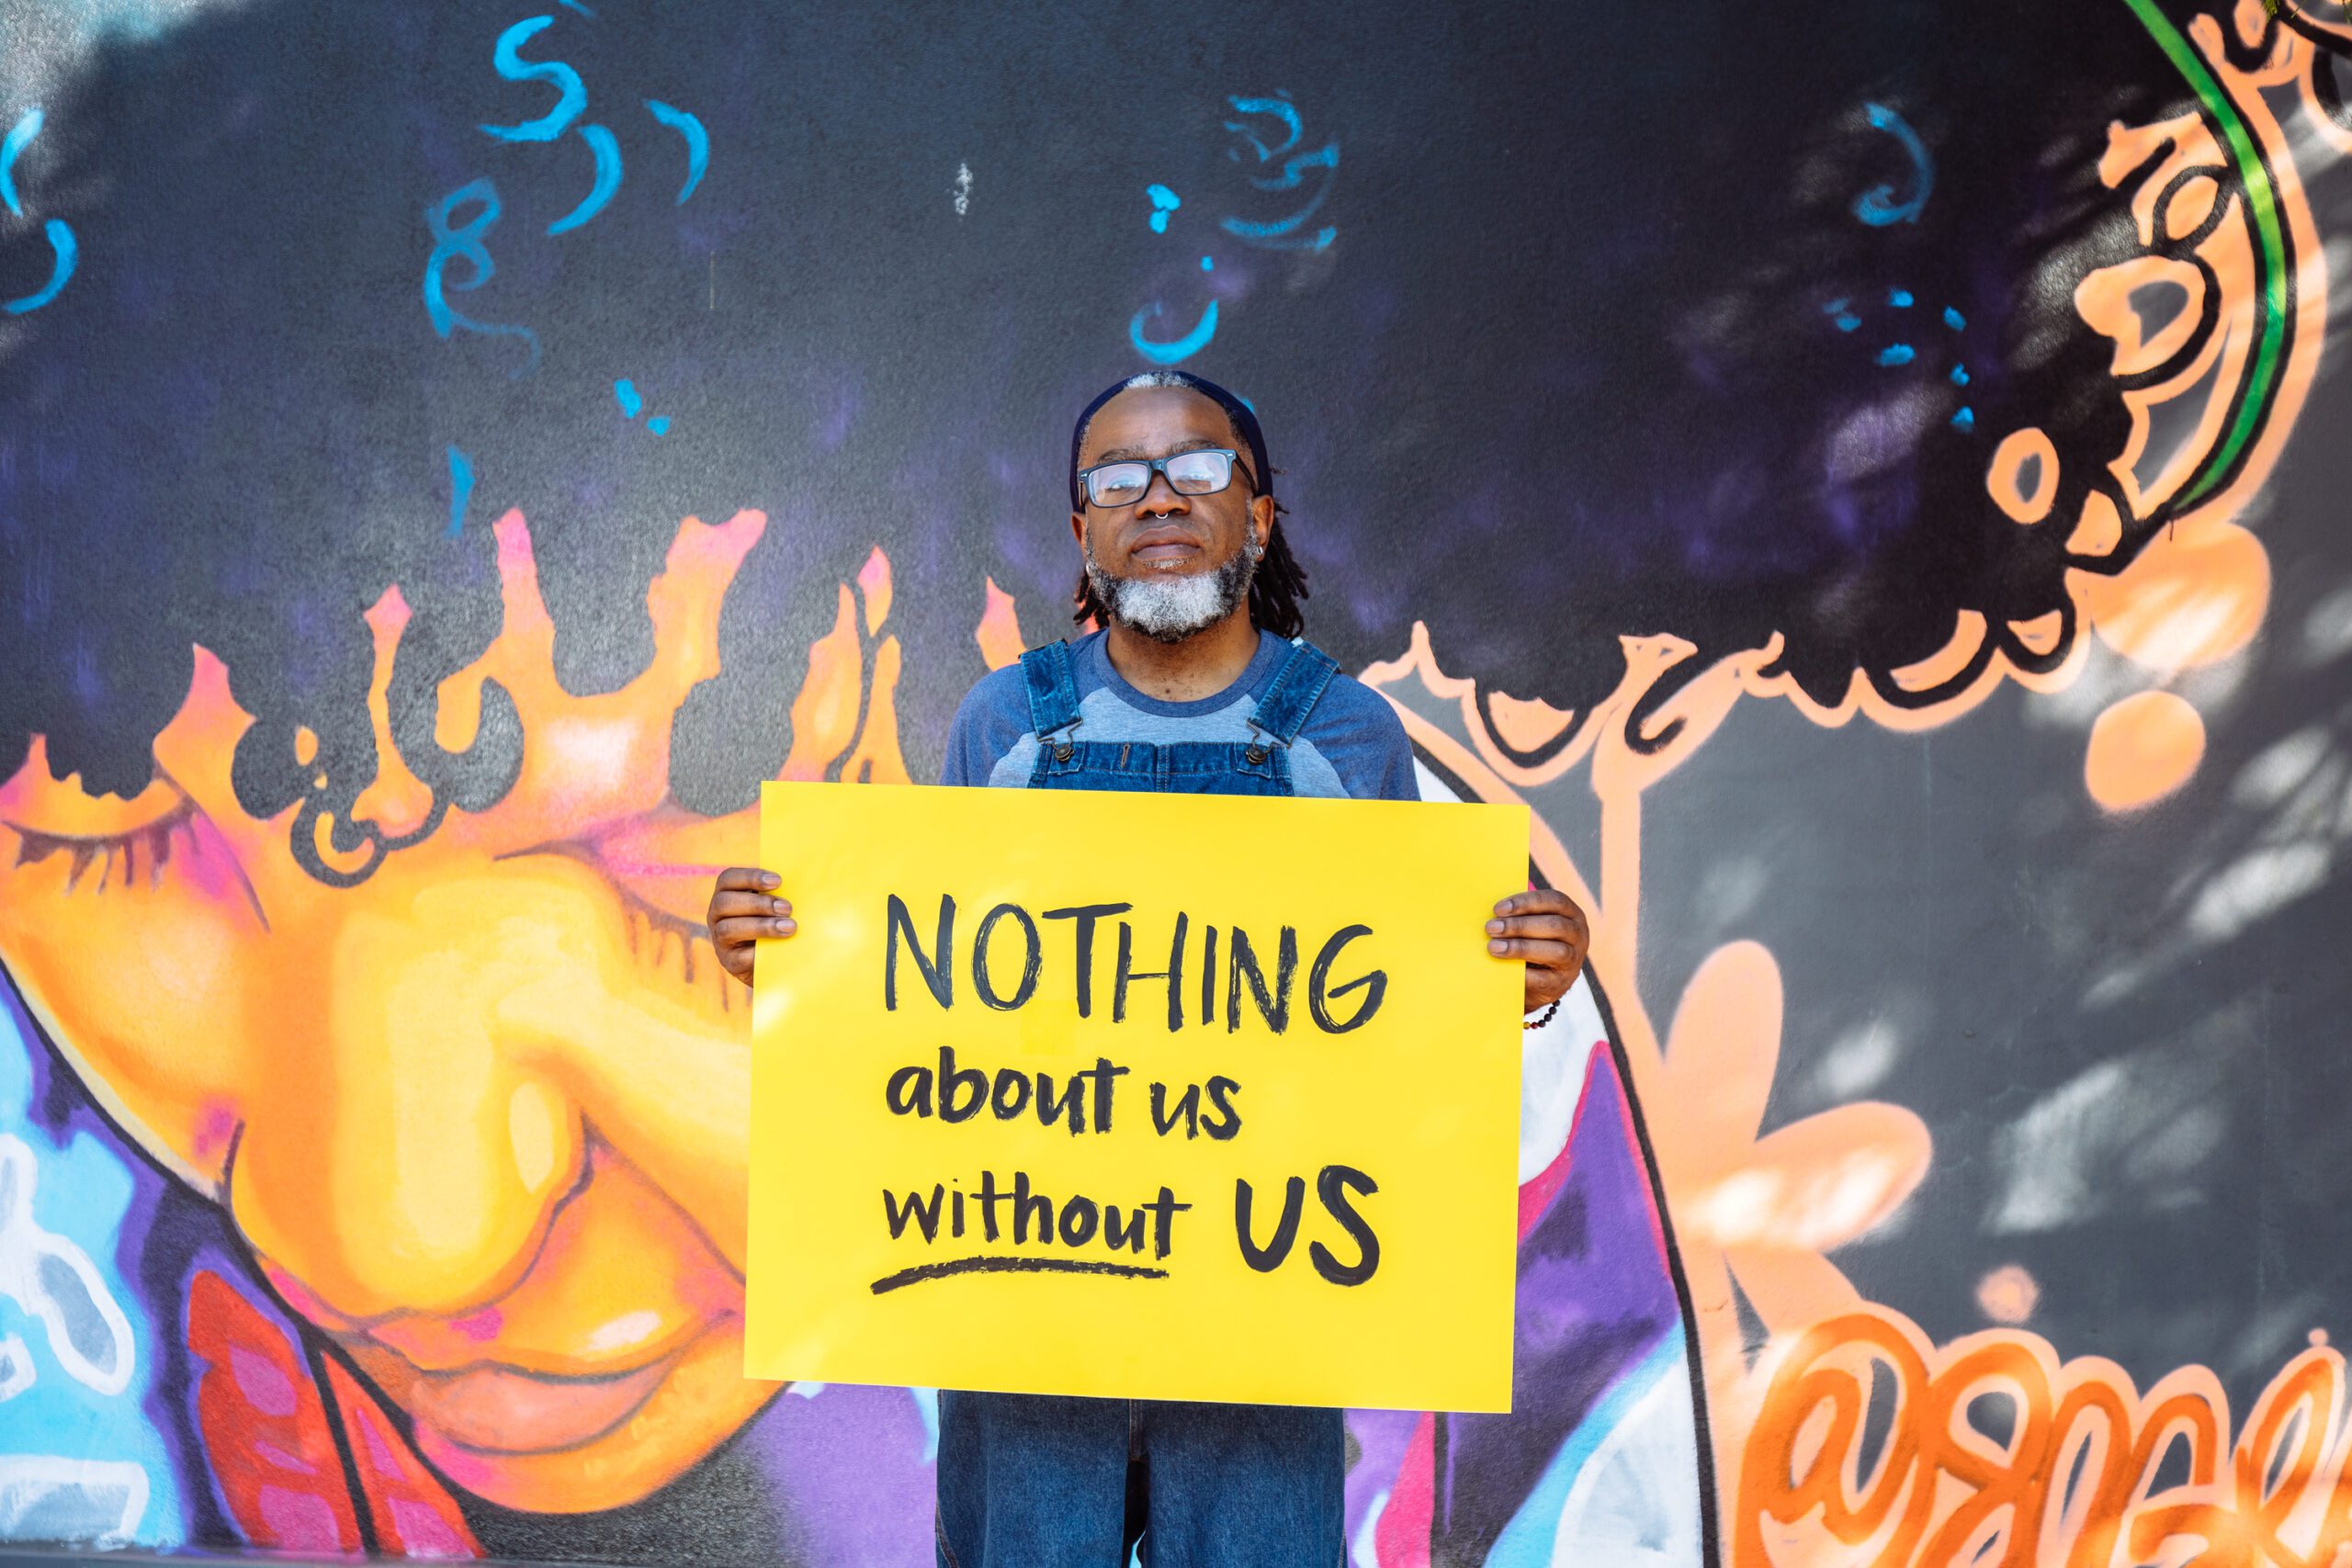 A Deaf Black man wearing glasses looks neutrally at the camera while holding a hand lettered sign declaring “NOTHING about us without US.” The man wears denim overalls and has a black and white beard, septum piercing, and hair pulled back with a bandana. The background features a vibrant mural of a Black woman looking down.